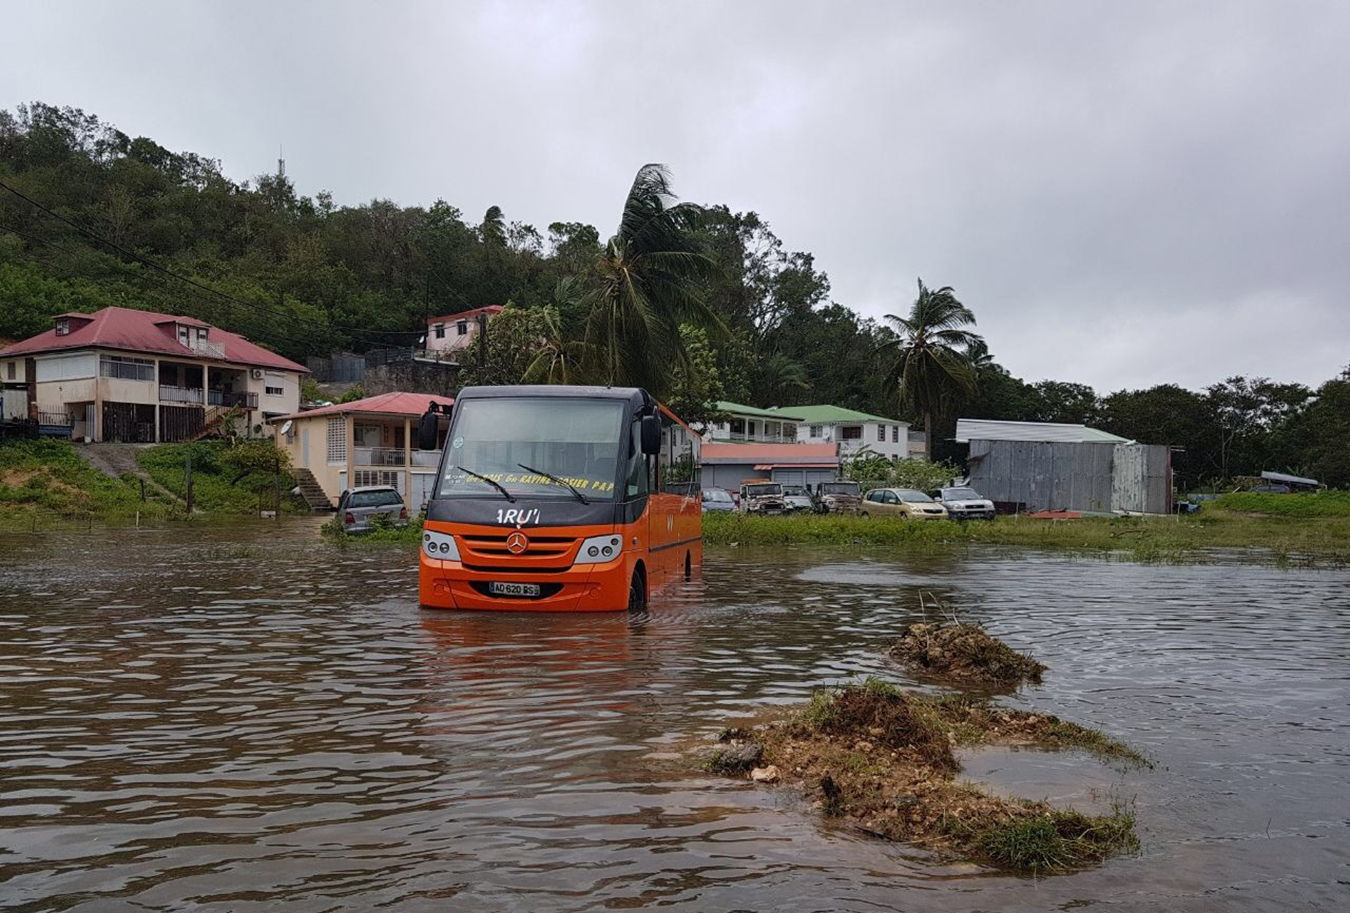 This photo provided by Frank Phazian shows flooding caused by Hurricane Maria near Le Raizet, Guadeloupe, Tuesday, Sept. 19, 2017. (Frank Phazian via AP)